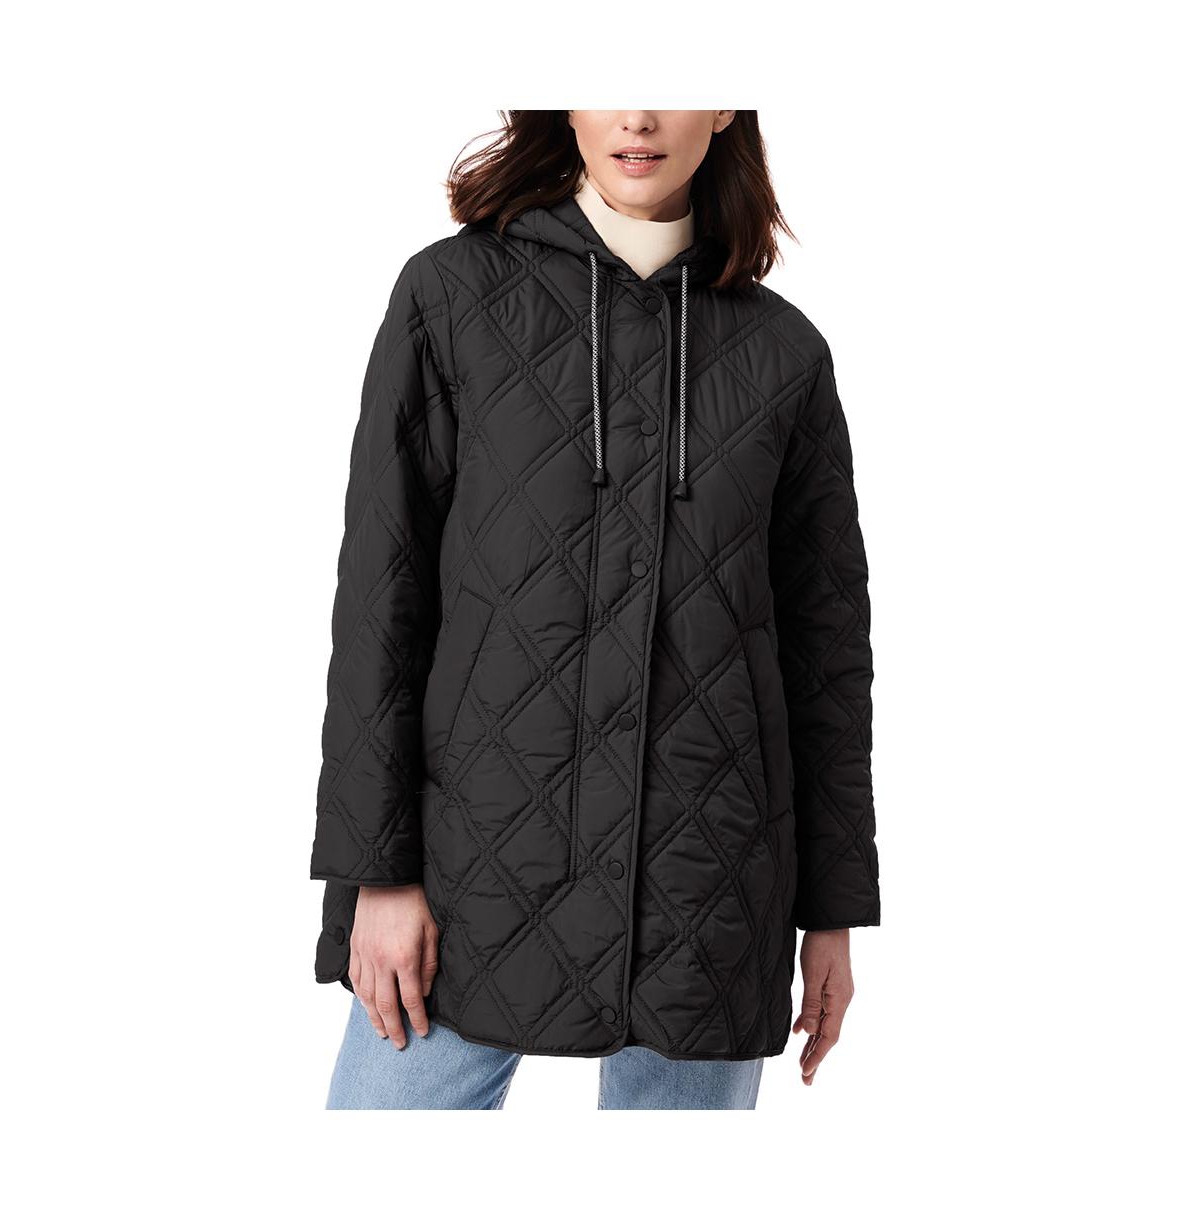 Women's Light Weight Quilted Jacket - Night shadow